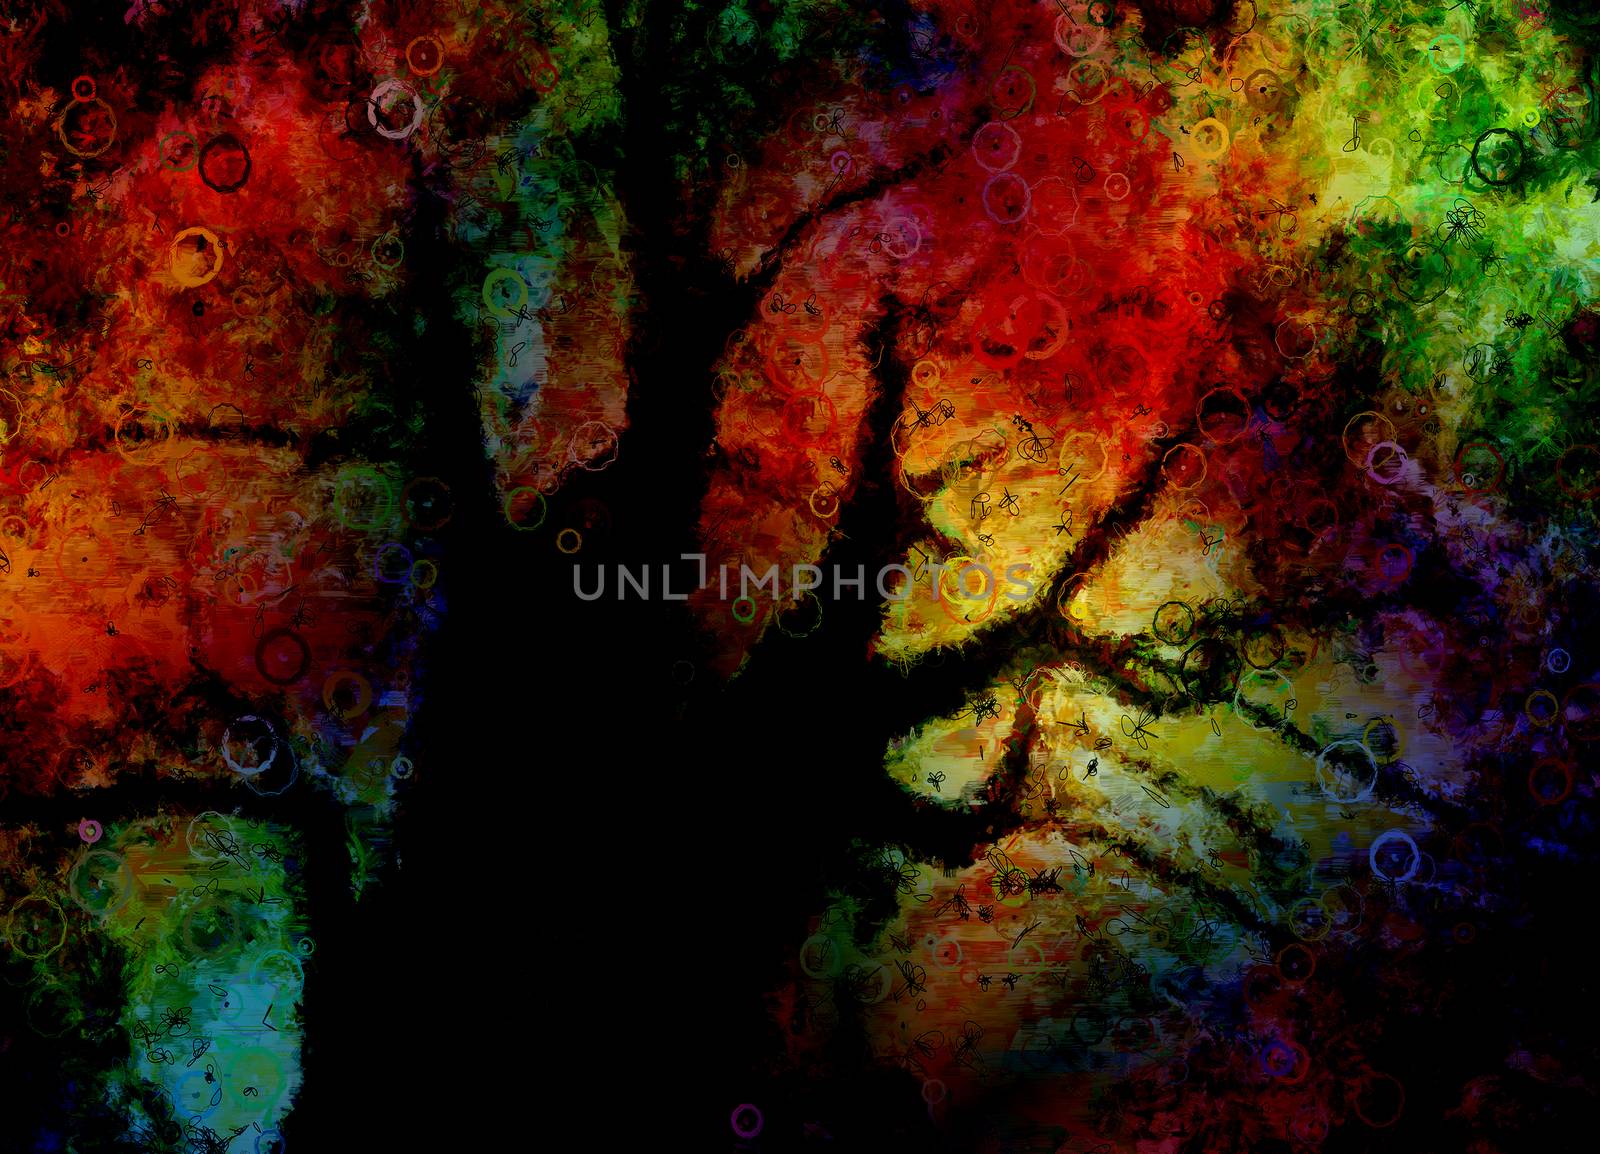 Colorful Abstract Tree. 3D rendering.